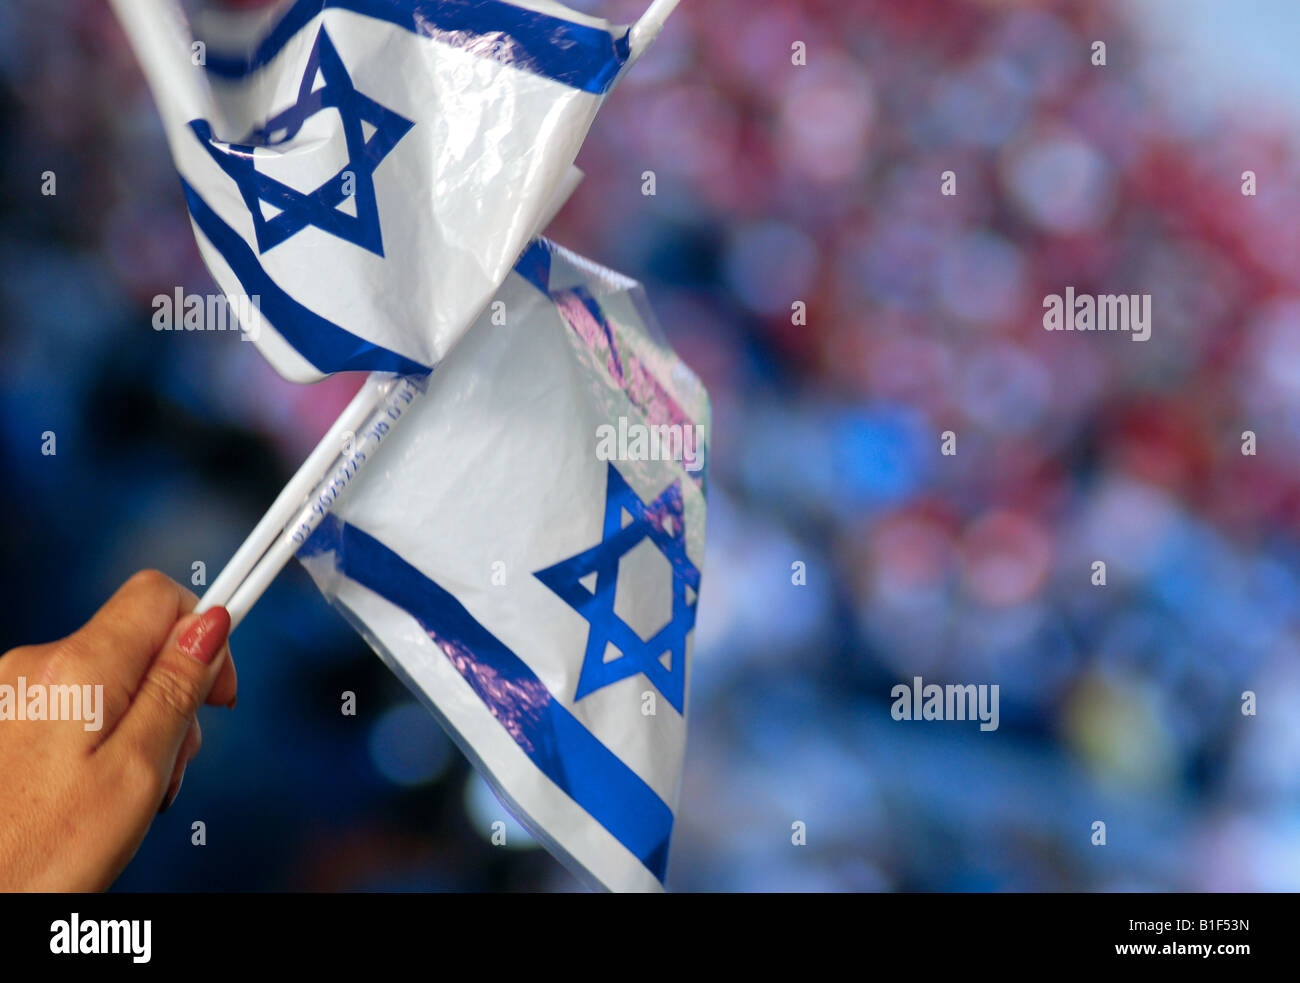 A middle-aged lady waves Israeli flags at an Israel International football match in Basle, Switzerland. Stock Photo